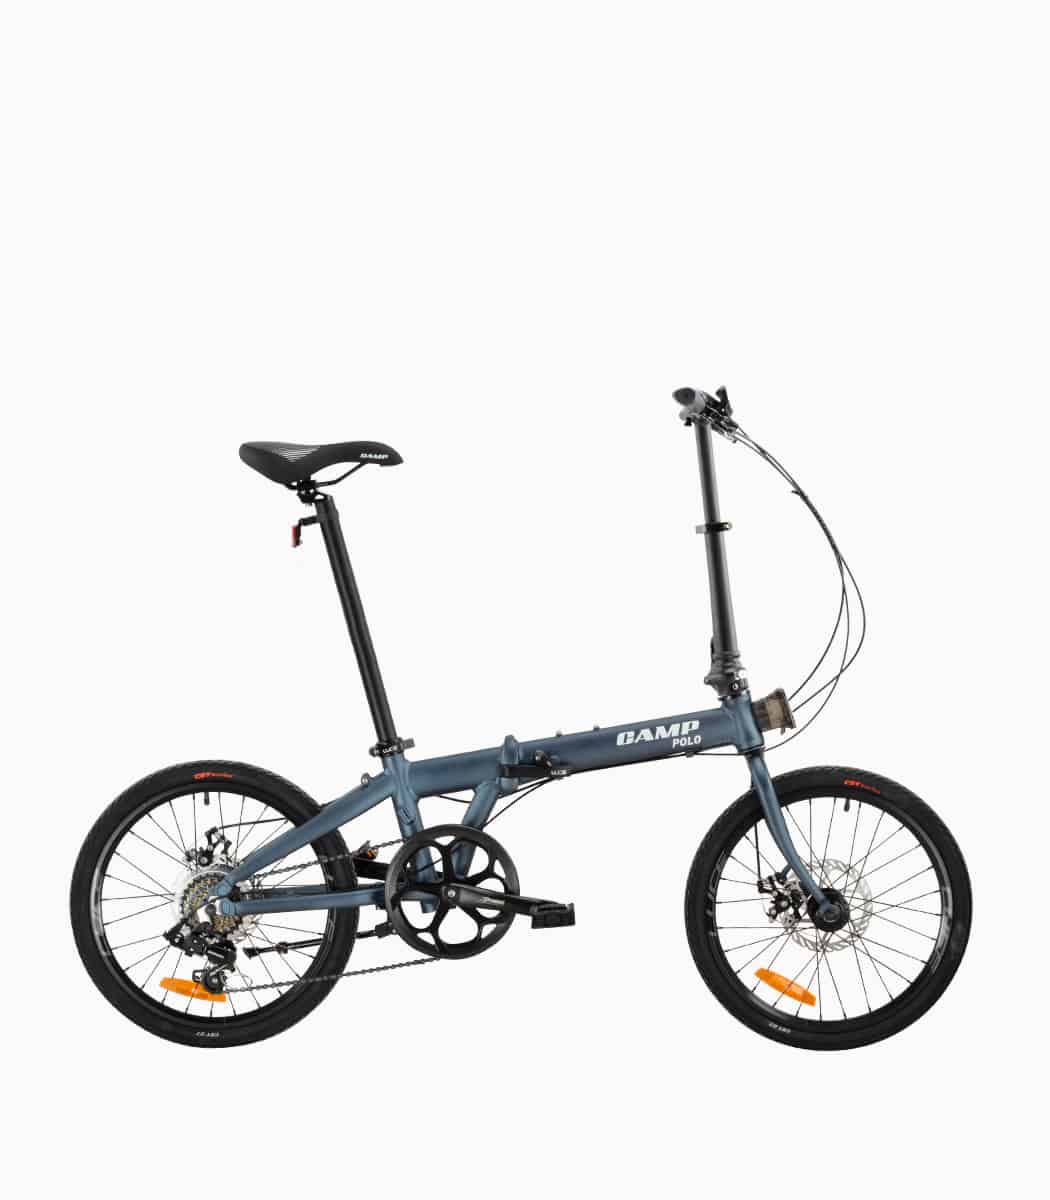 CAMP Polo (GREY) foldable bicycle right V2